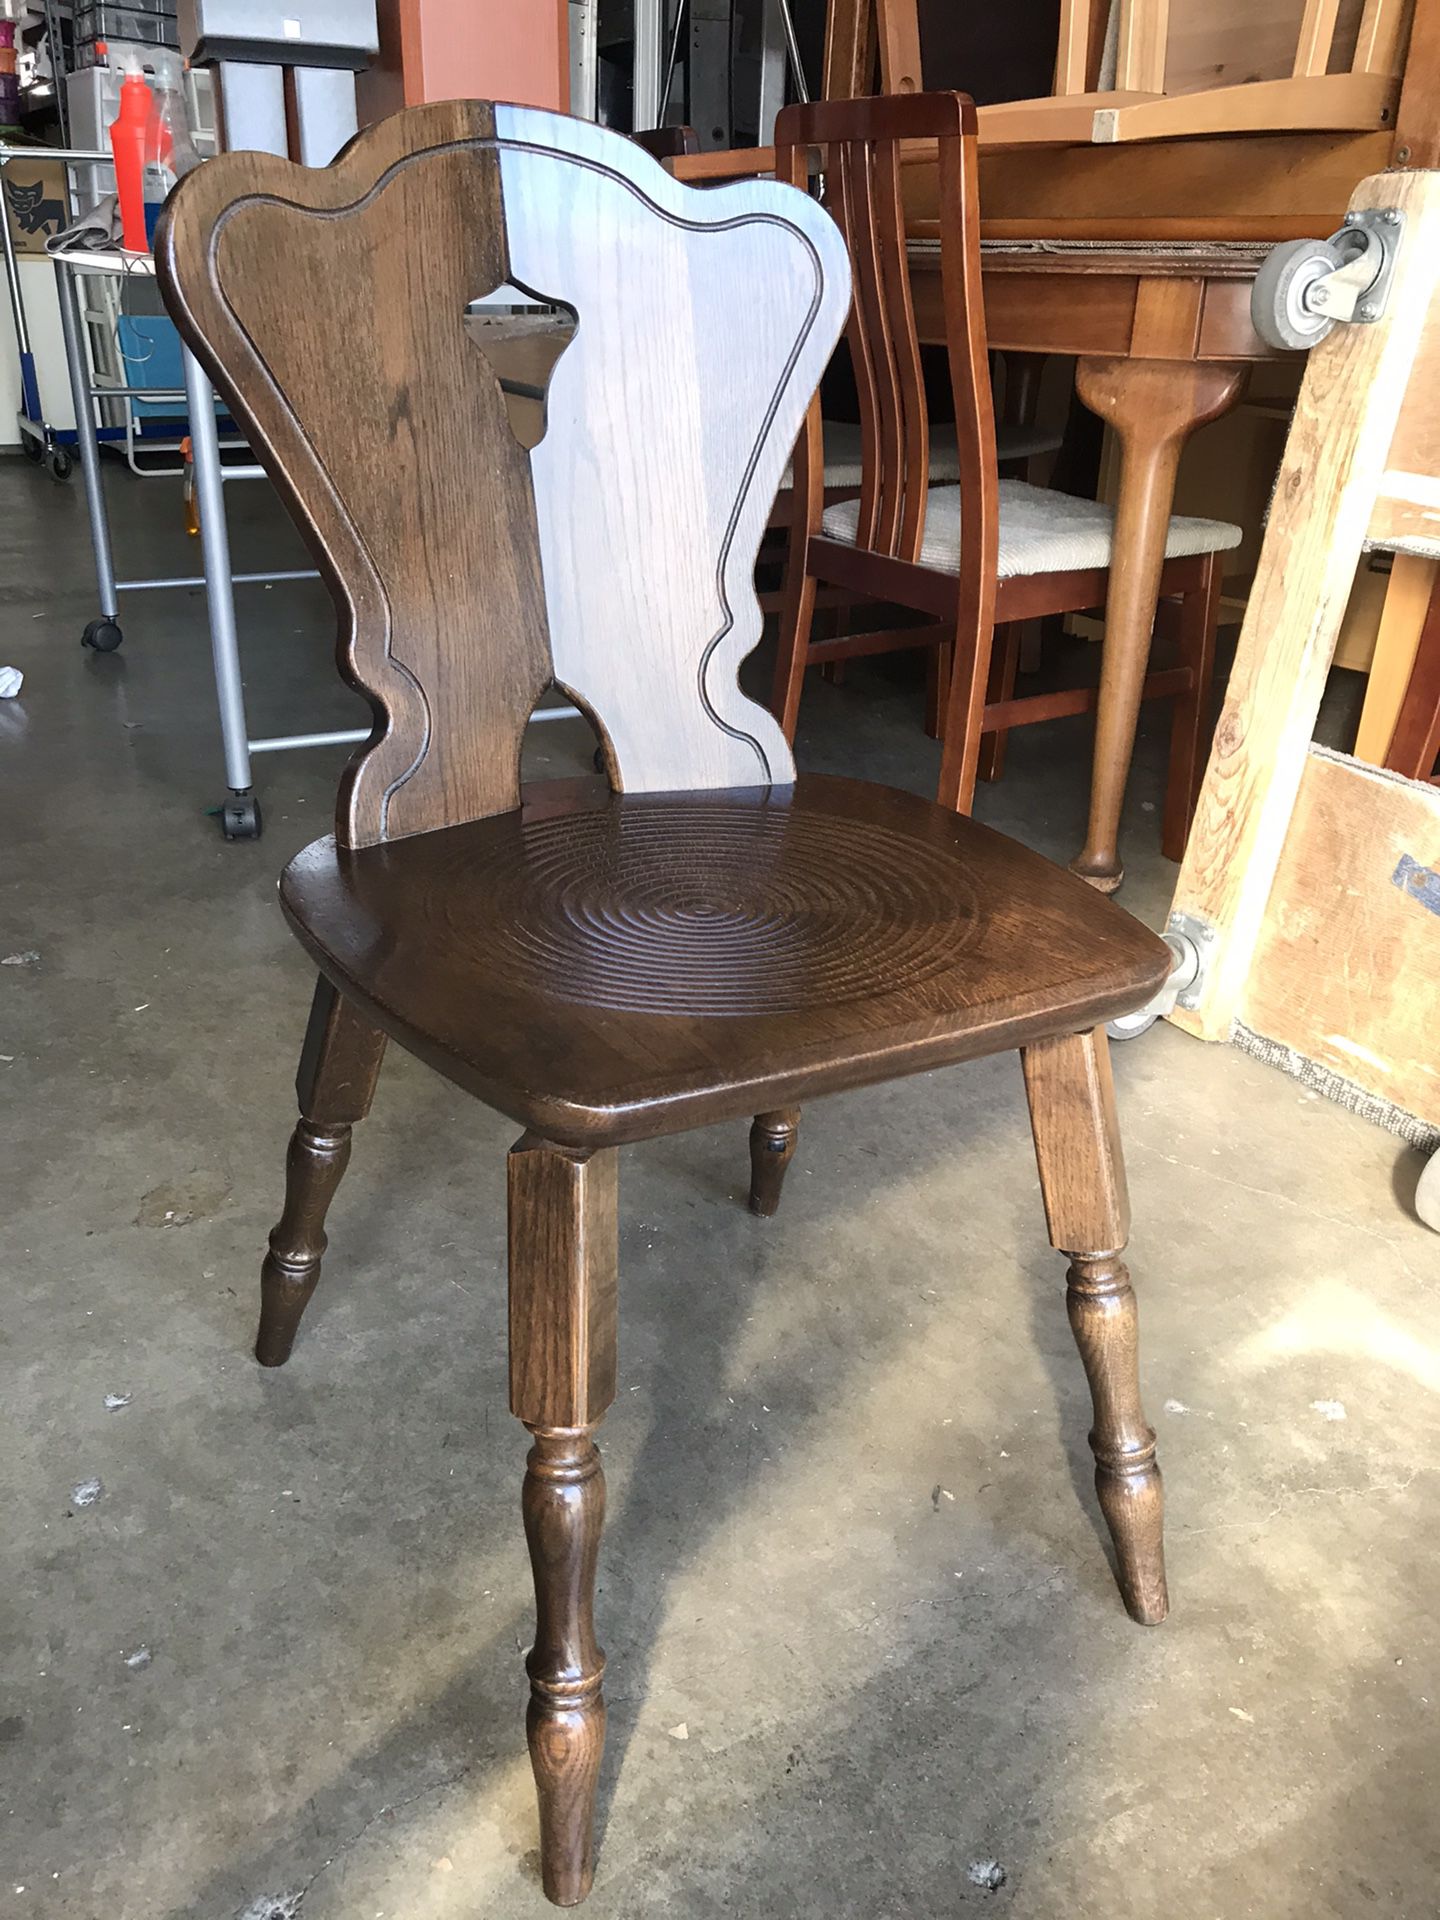 Antique solid wood chair